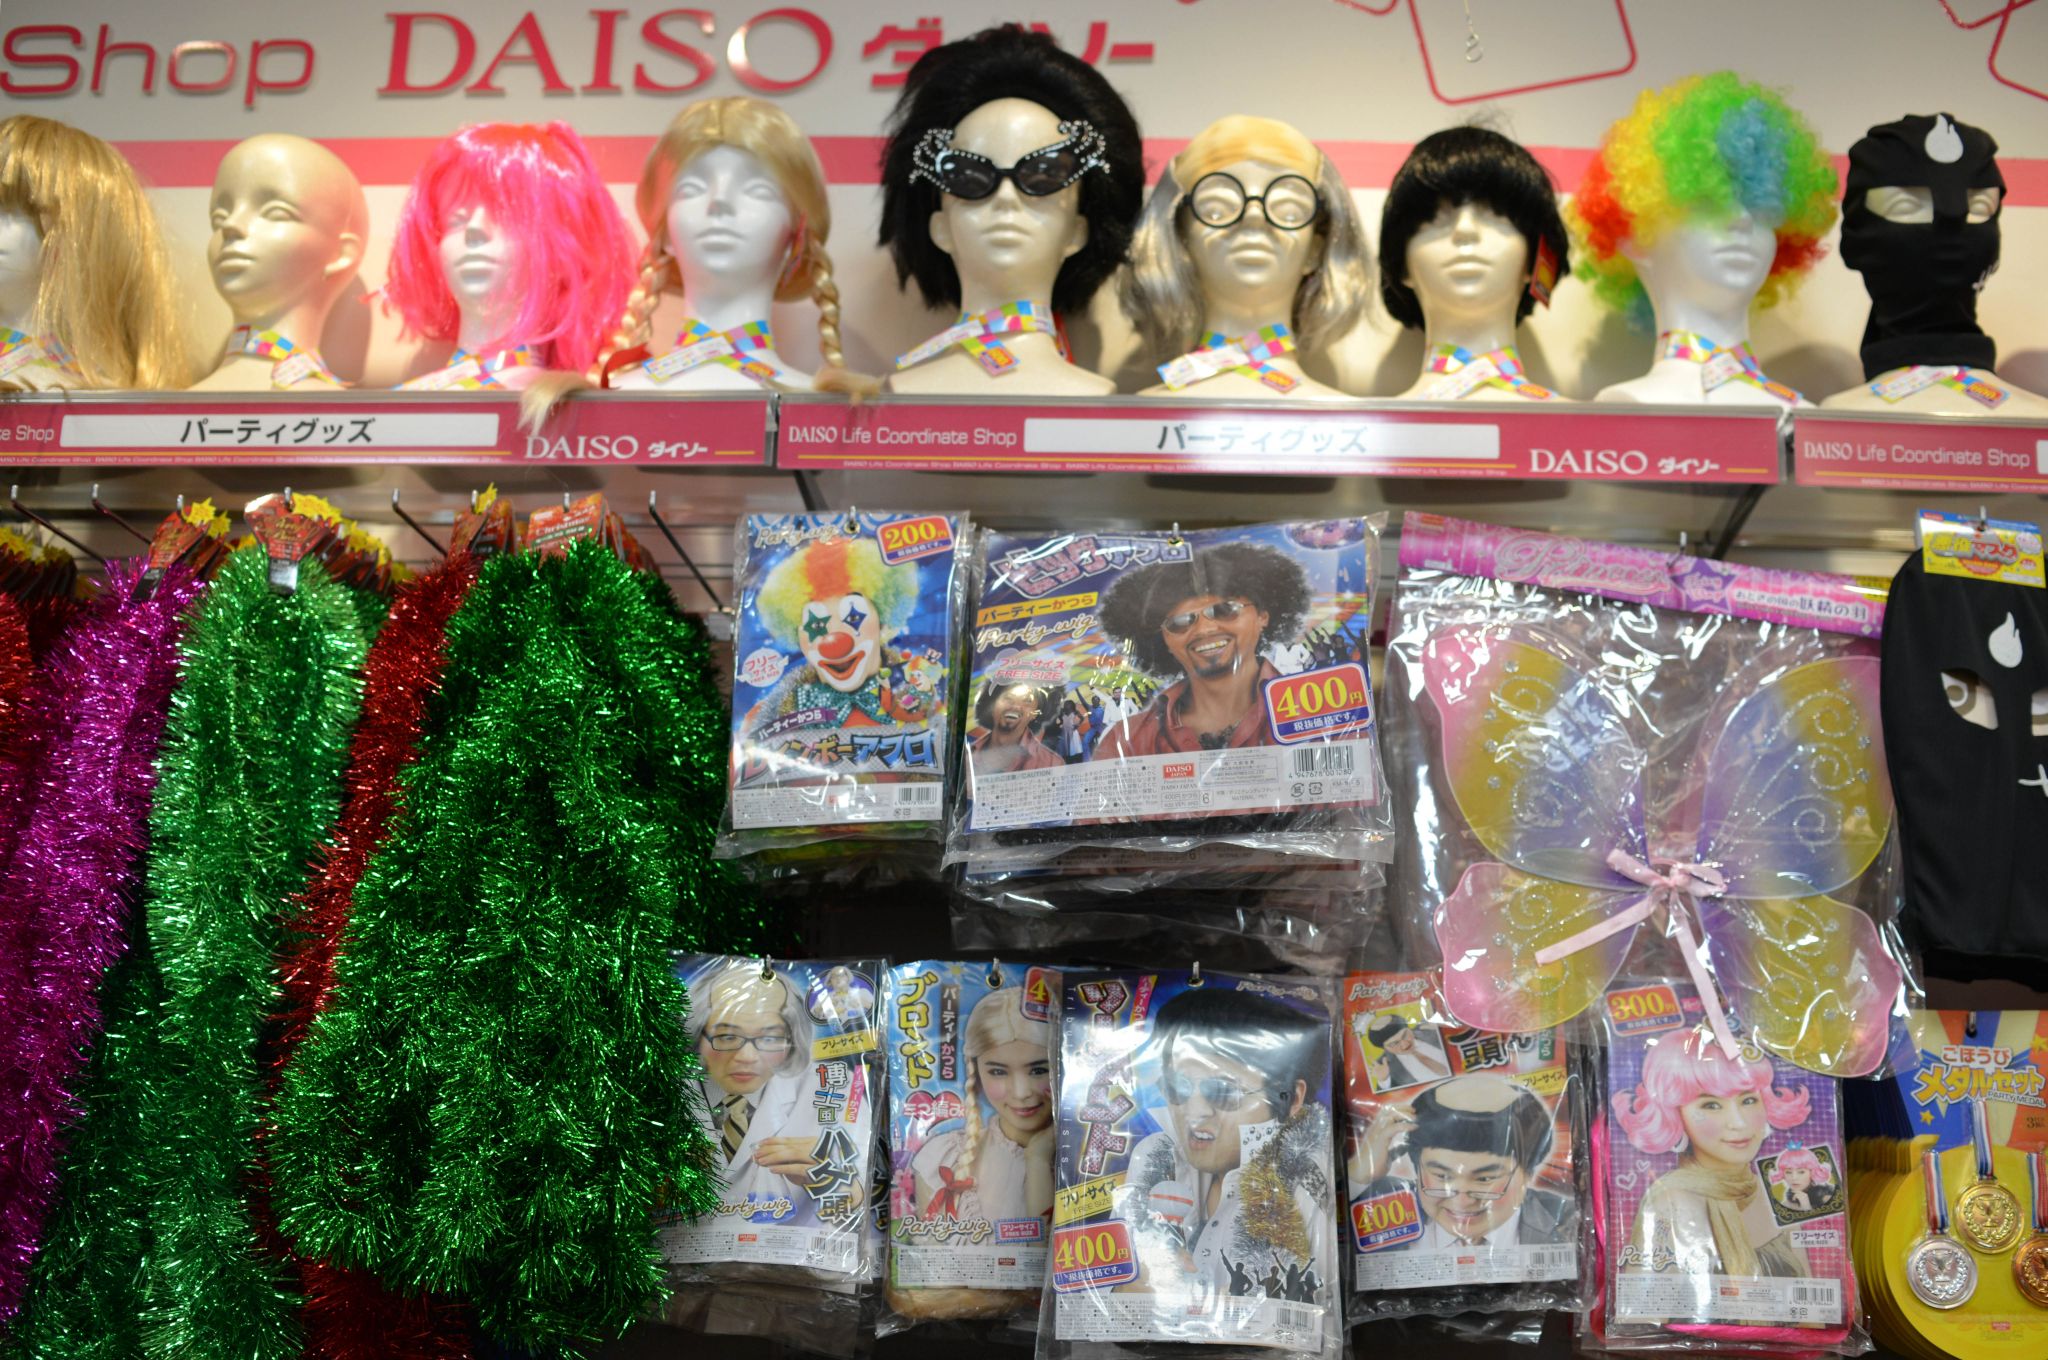 Japanese Dollar Store Daiso Expands With 30 USA Stores: Find Out